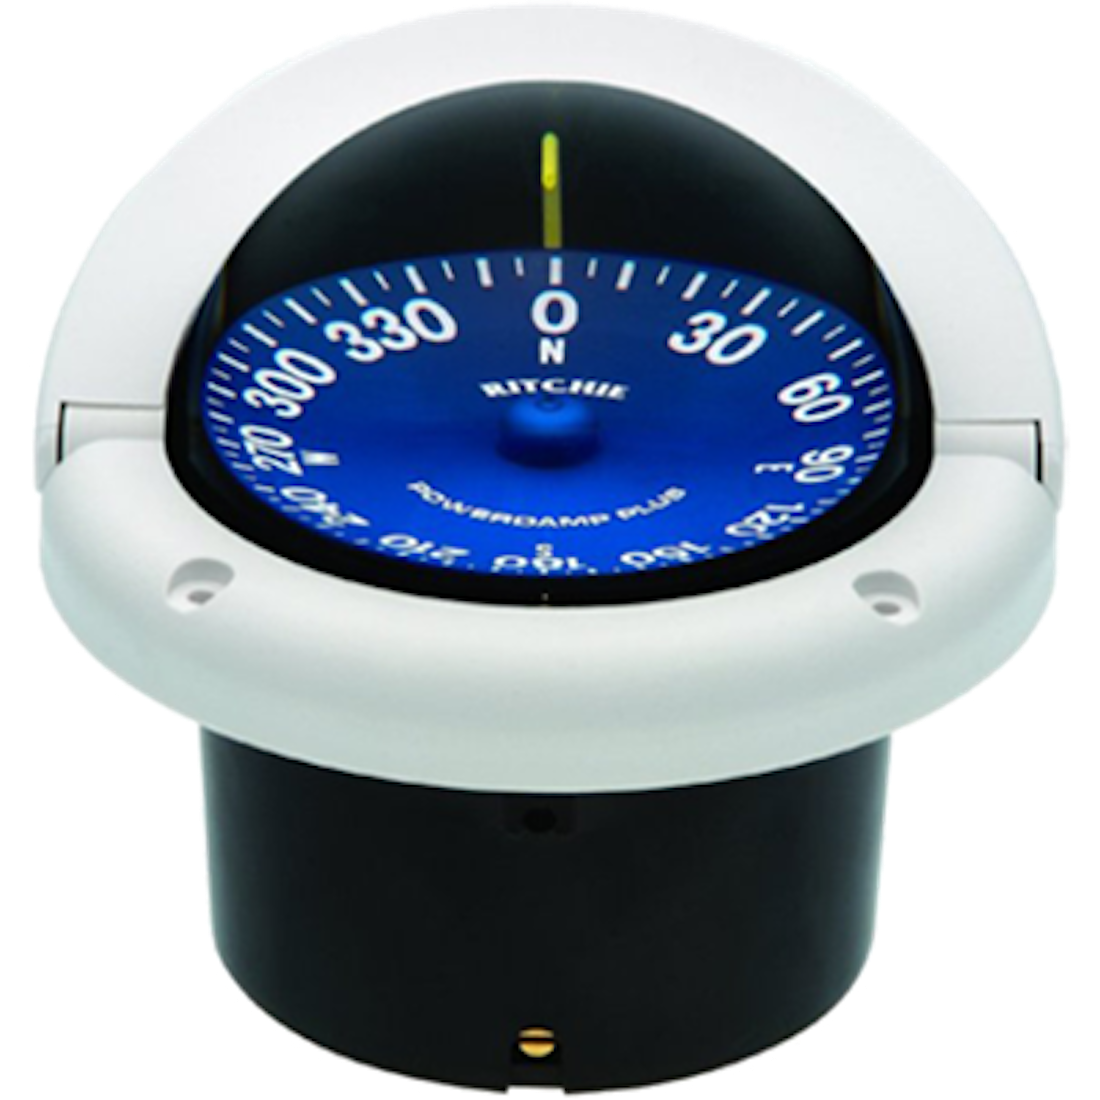 Ritchie SS-1002W SuperSport Compass - Flush Mount - White [SS-1002W]